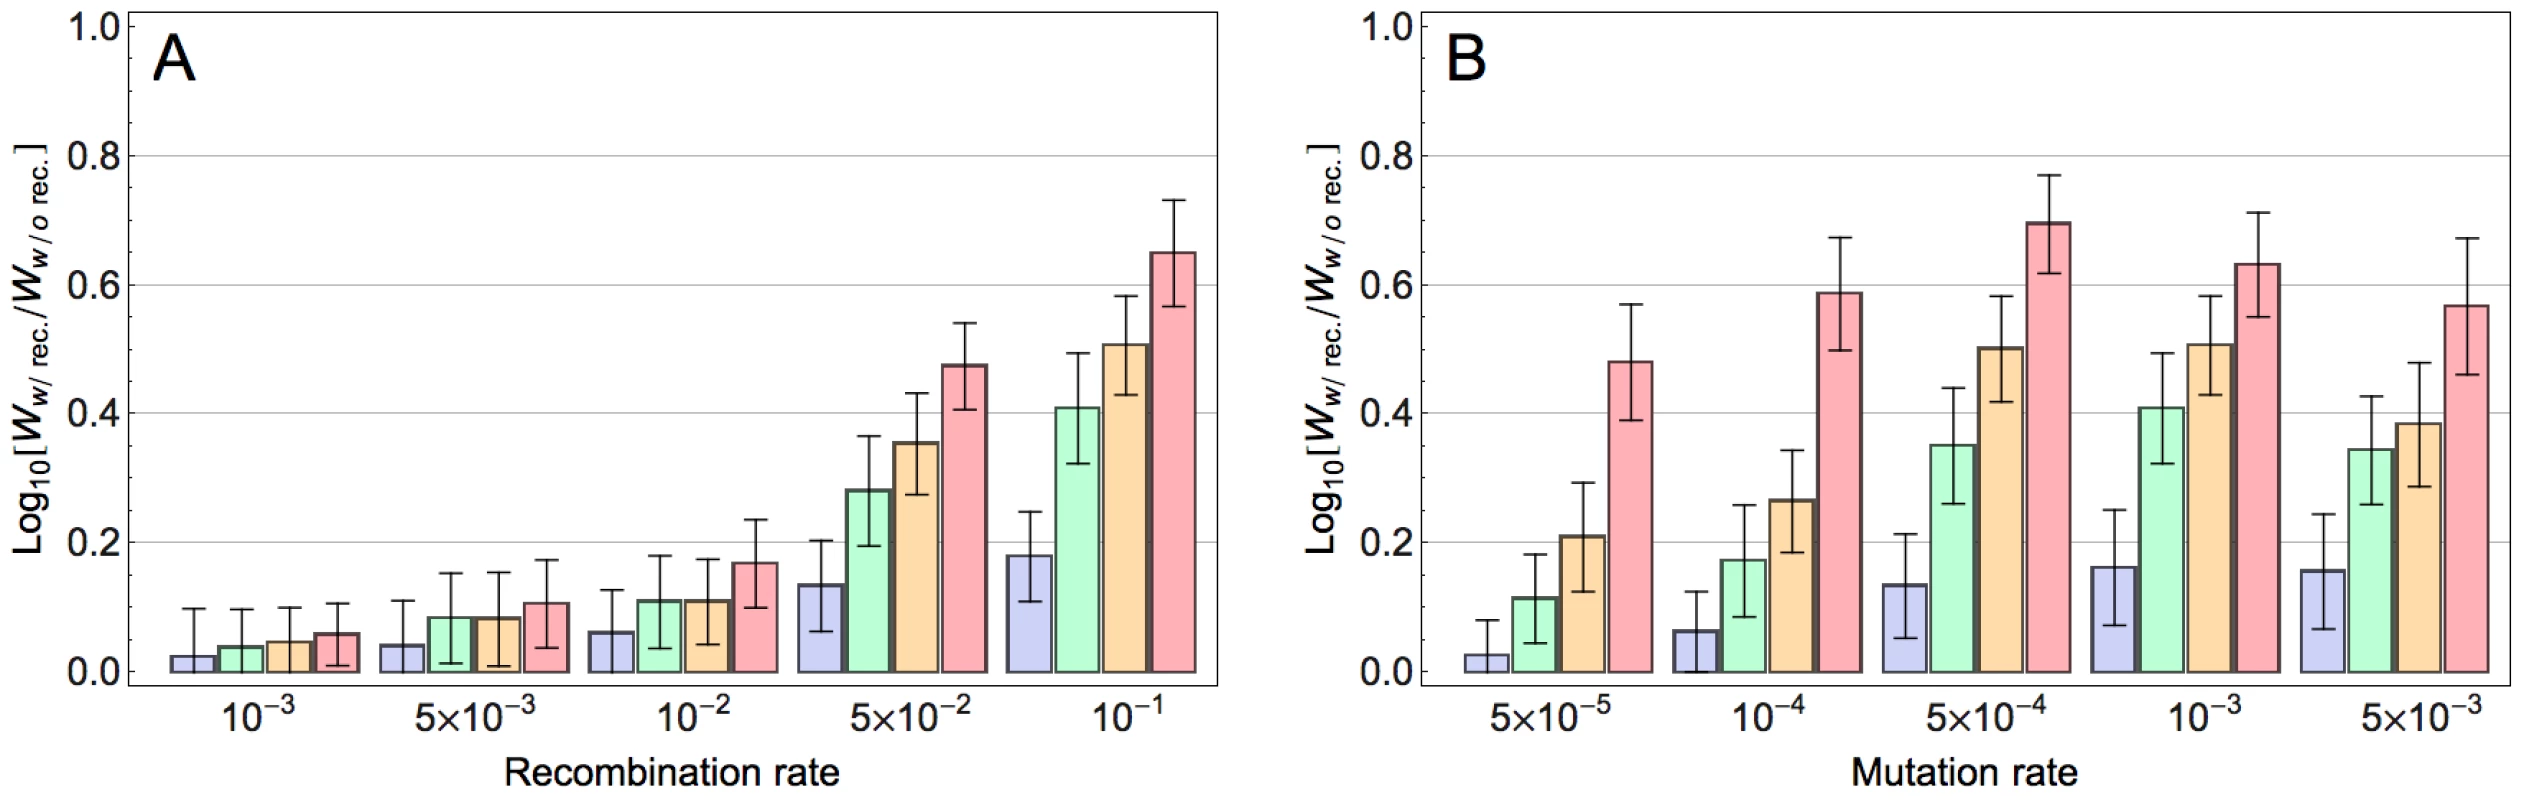 Effect of model parameters on the impact of recombination on adaptation.